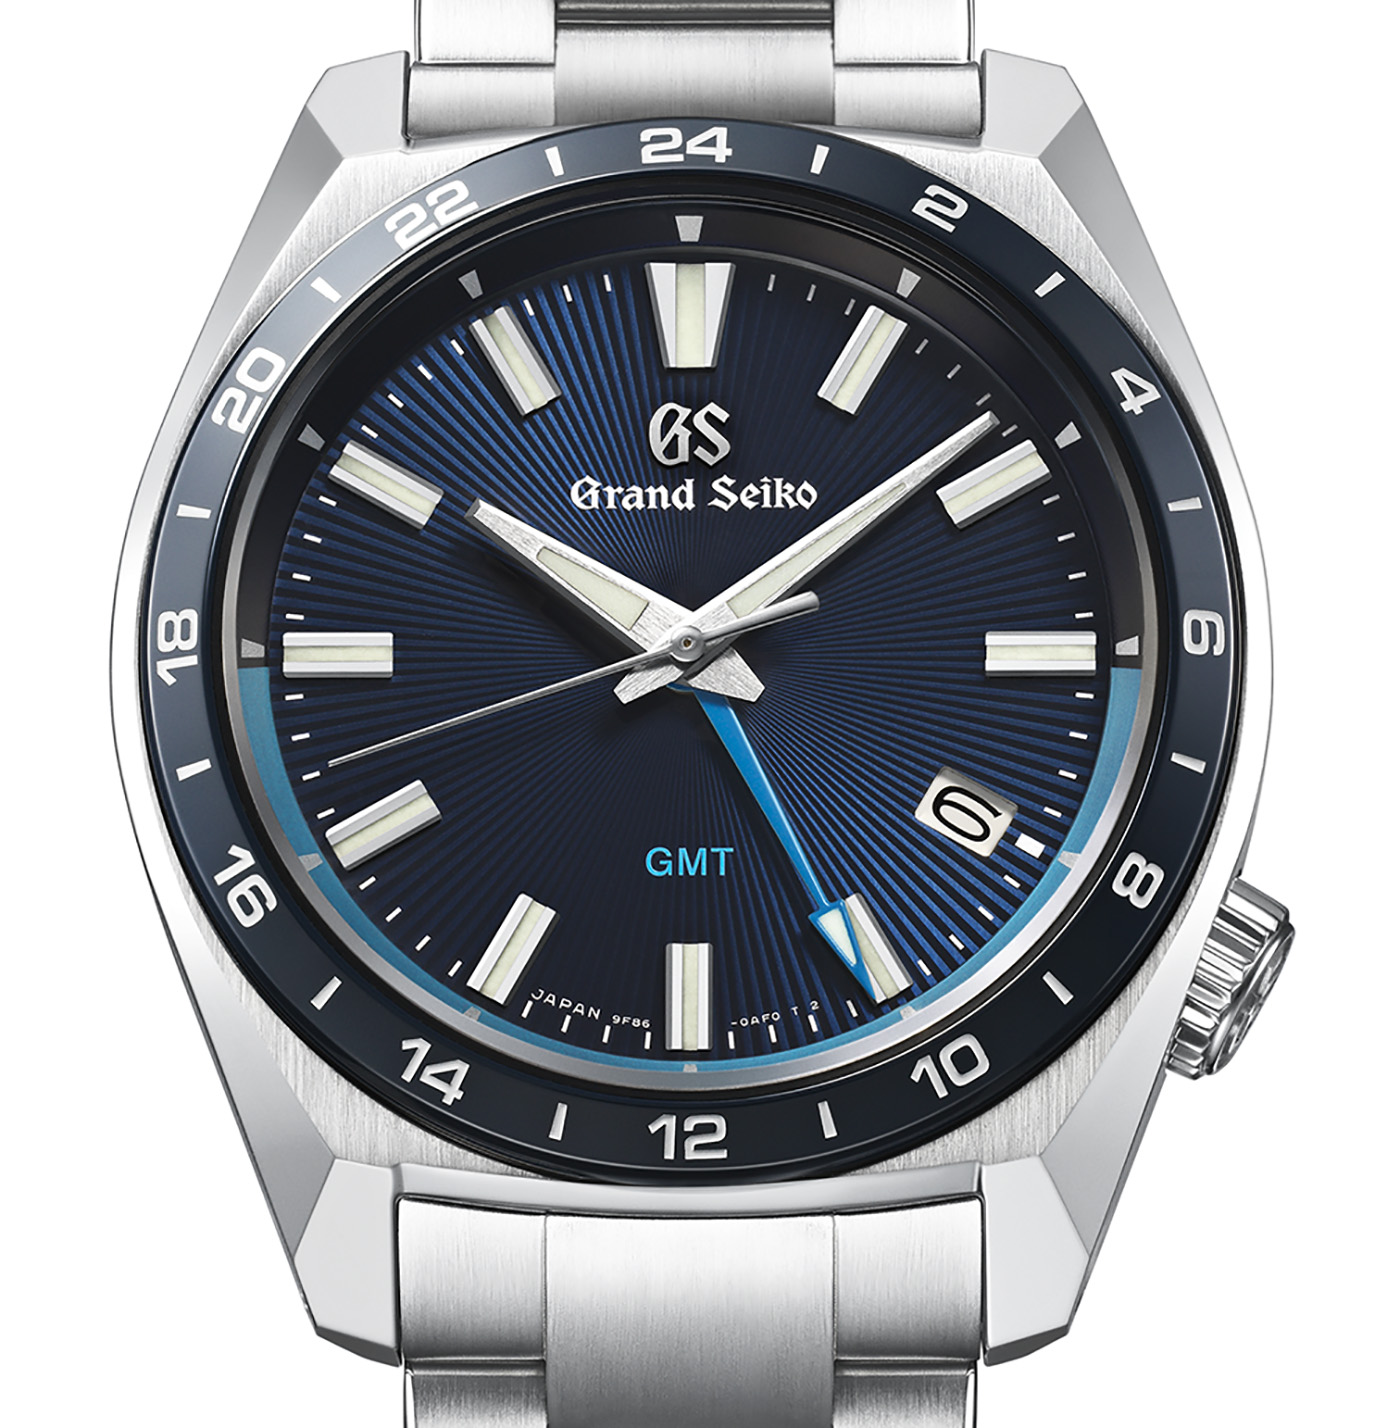 Grand Seiko Debuts Three New Models In 9F86 GMT Watch Line | aBlogtoWatch